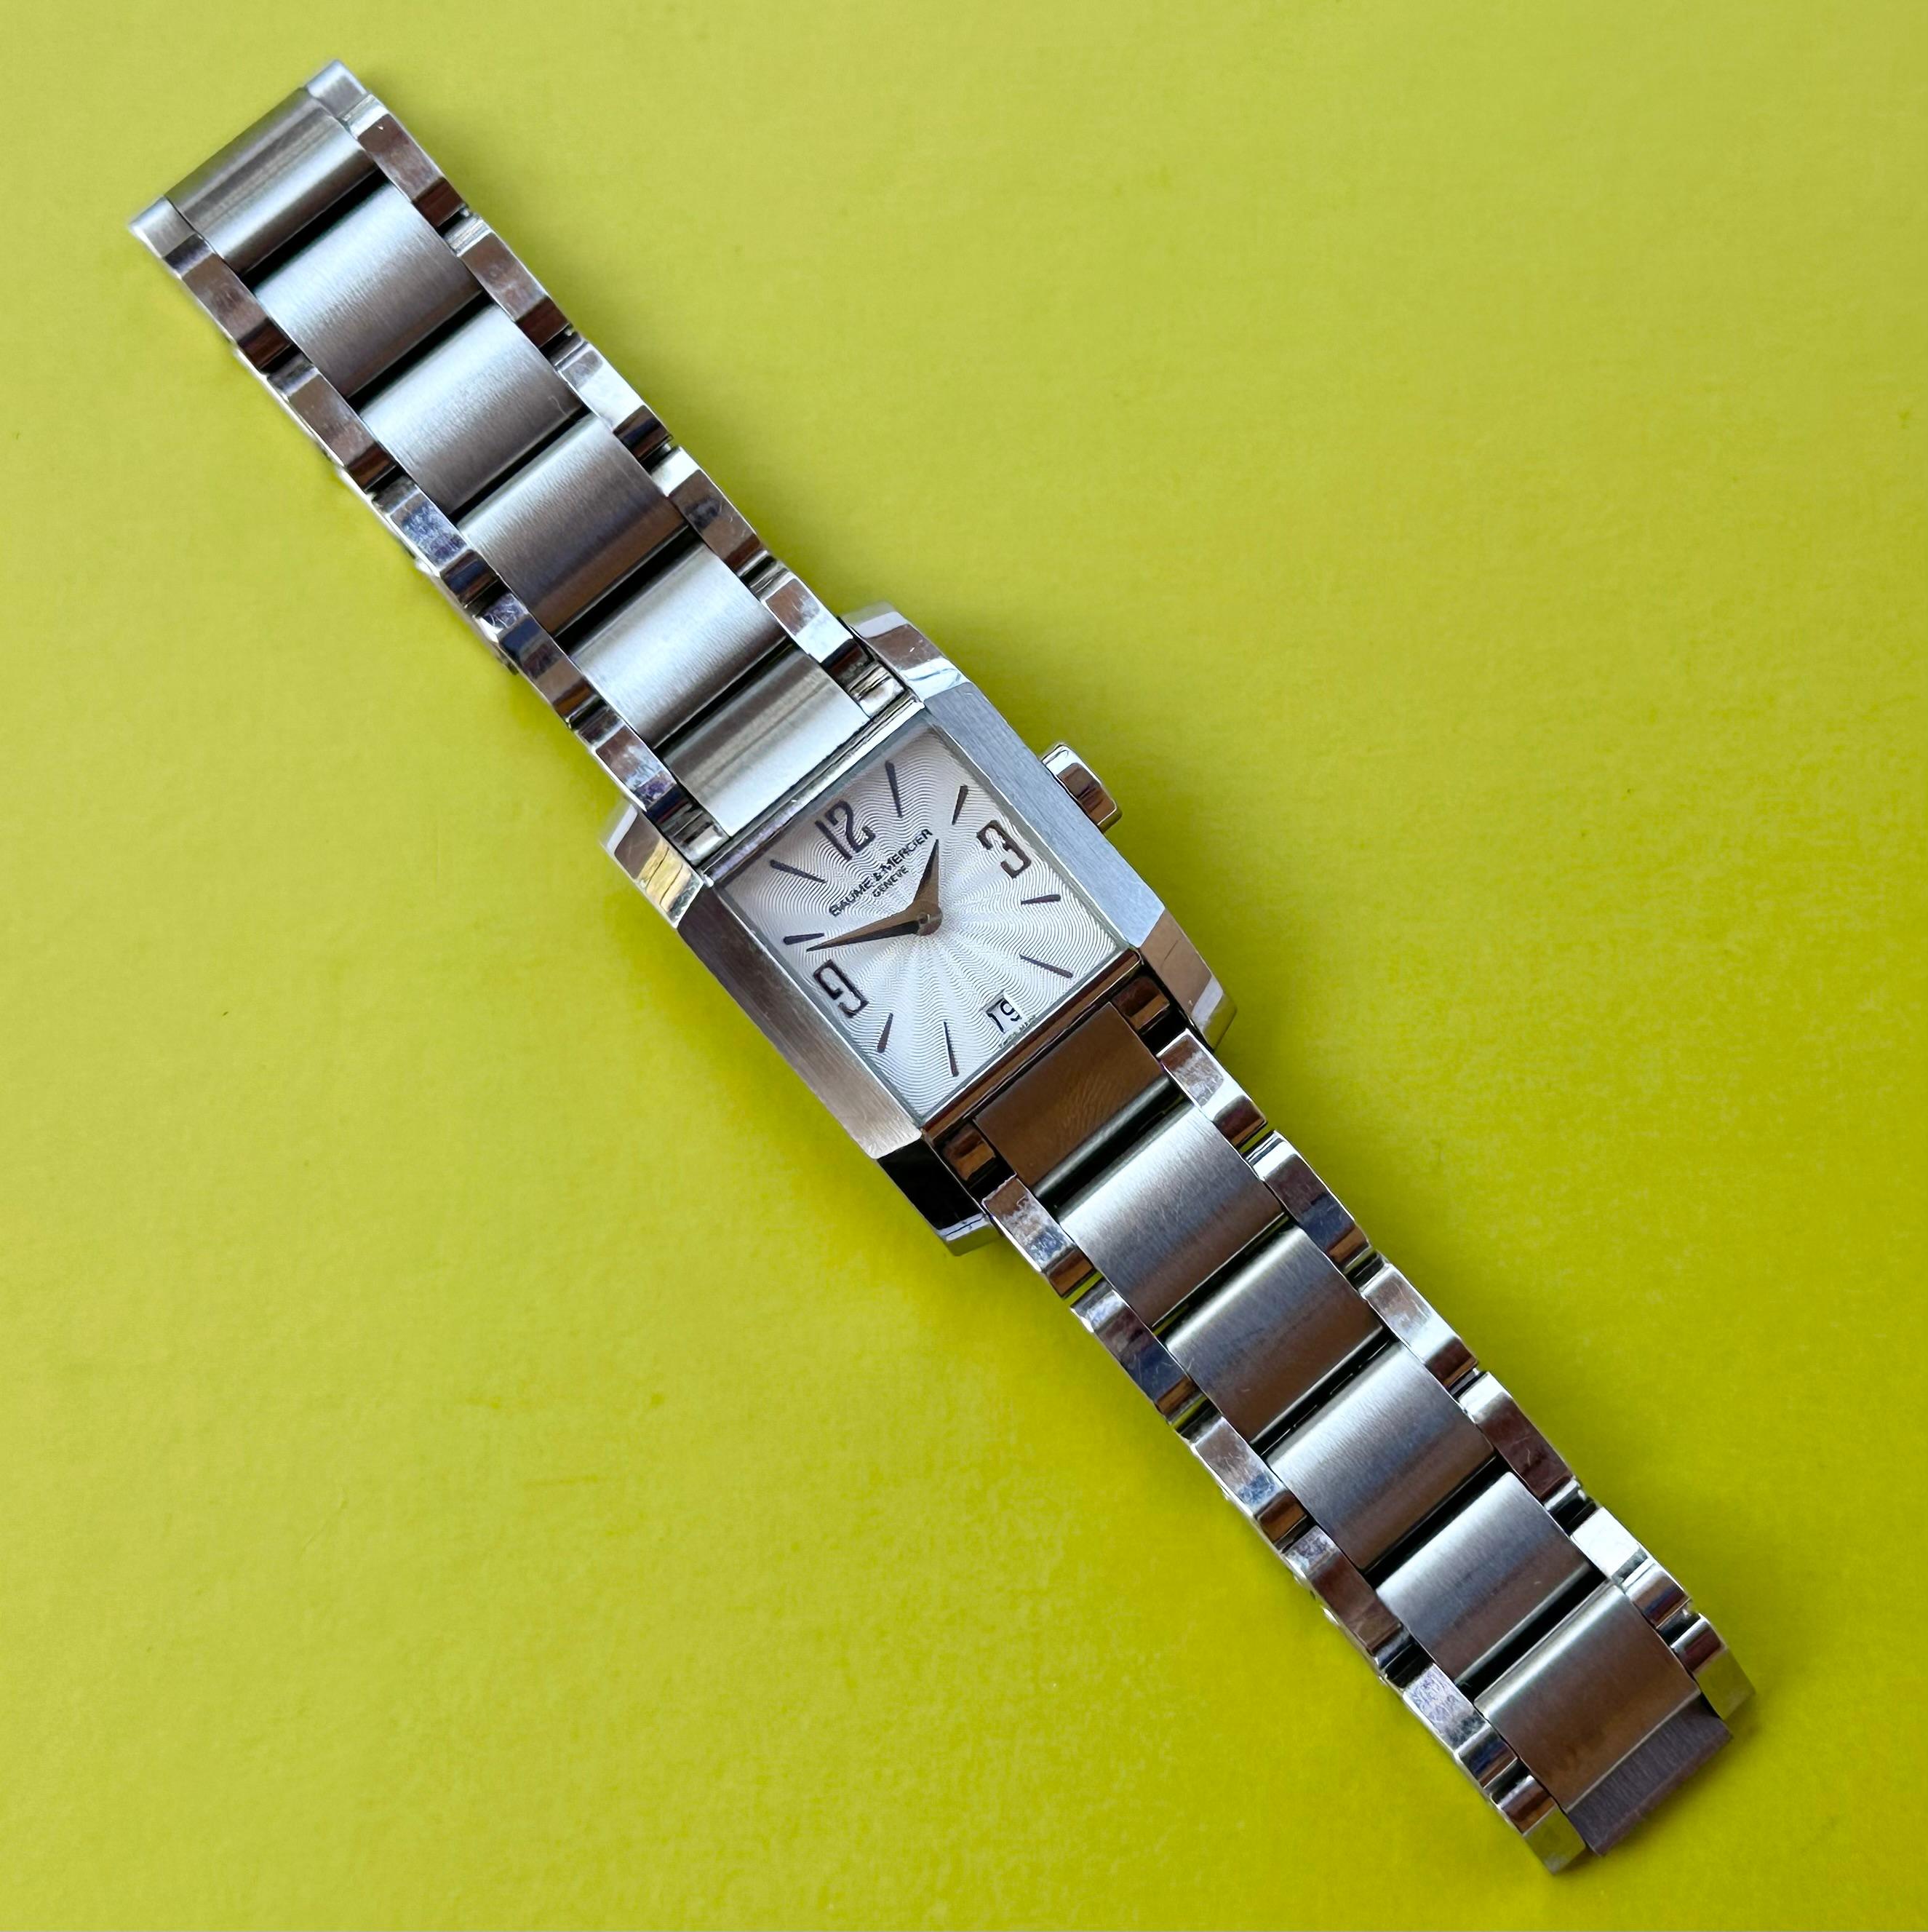 Brand: Baume & Mercier

Model: Hampton

Reference Number: 65488

Country Of Manufacture: Switzerland

Movement: Quartz

Case Material: Stainless steel

Measurements : Case width: 22 x 34 mm. (without crown)

Band Type : Stainless steel

Band